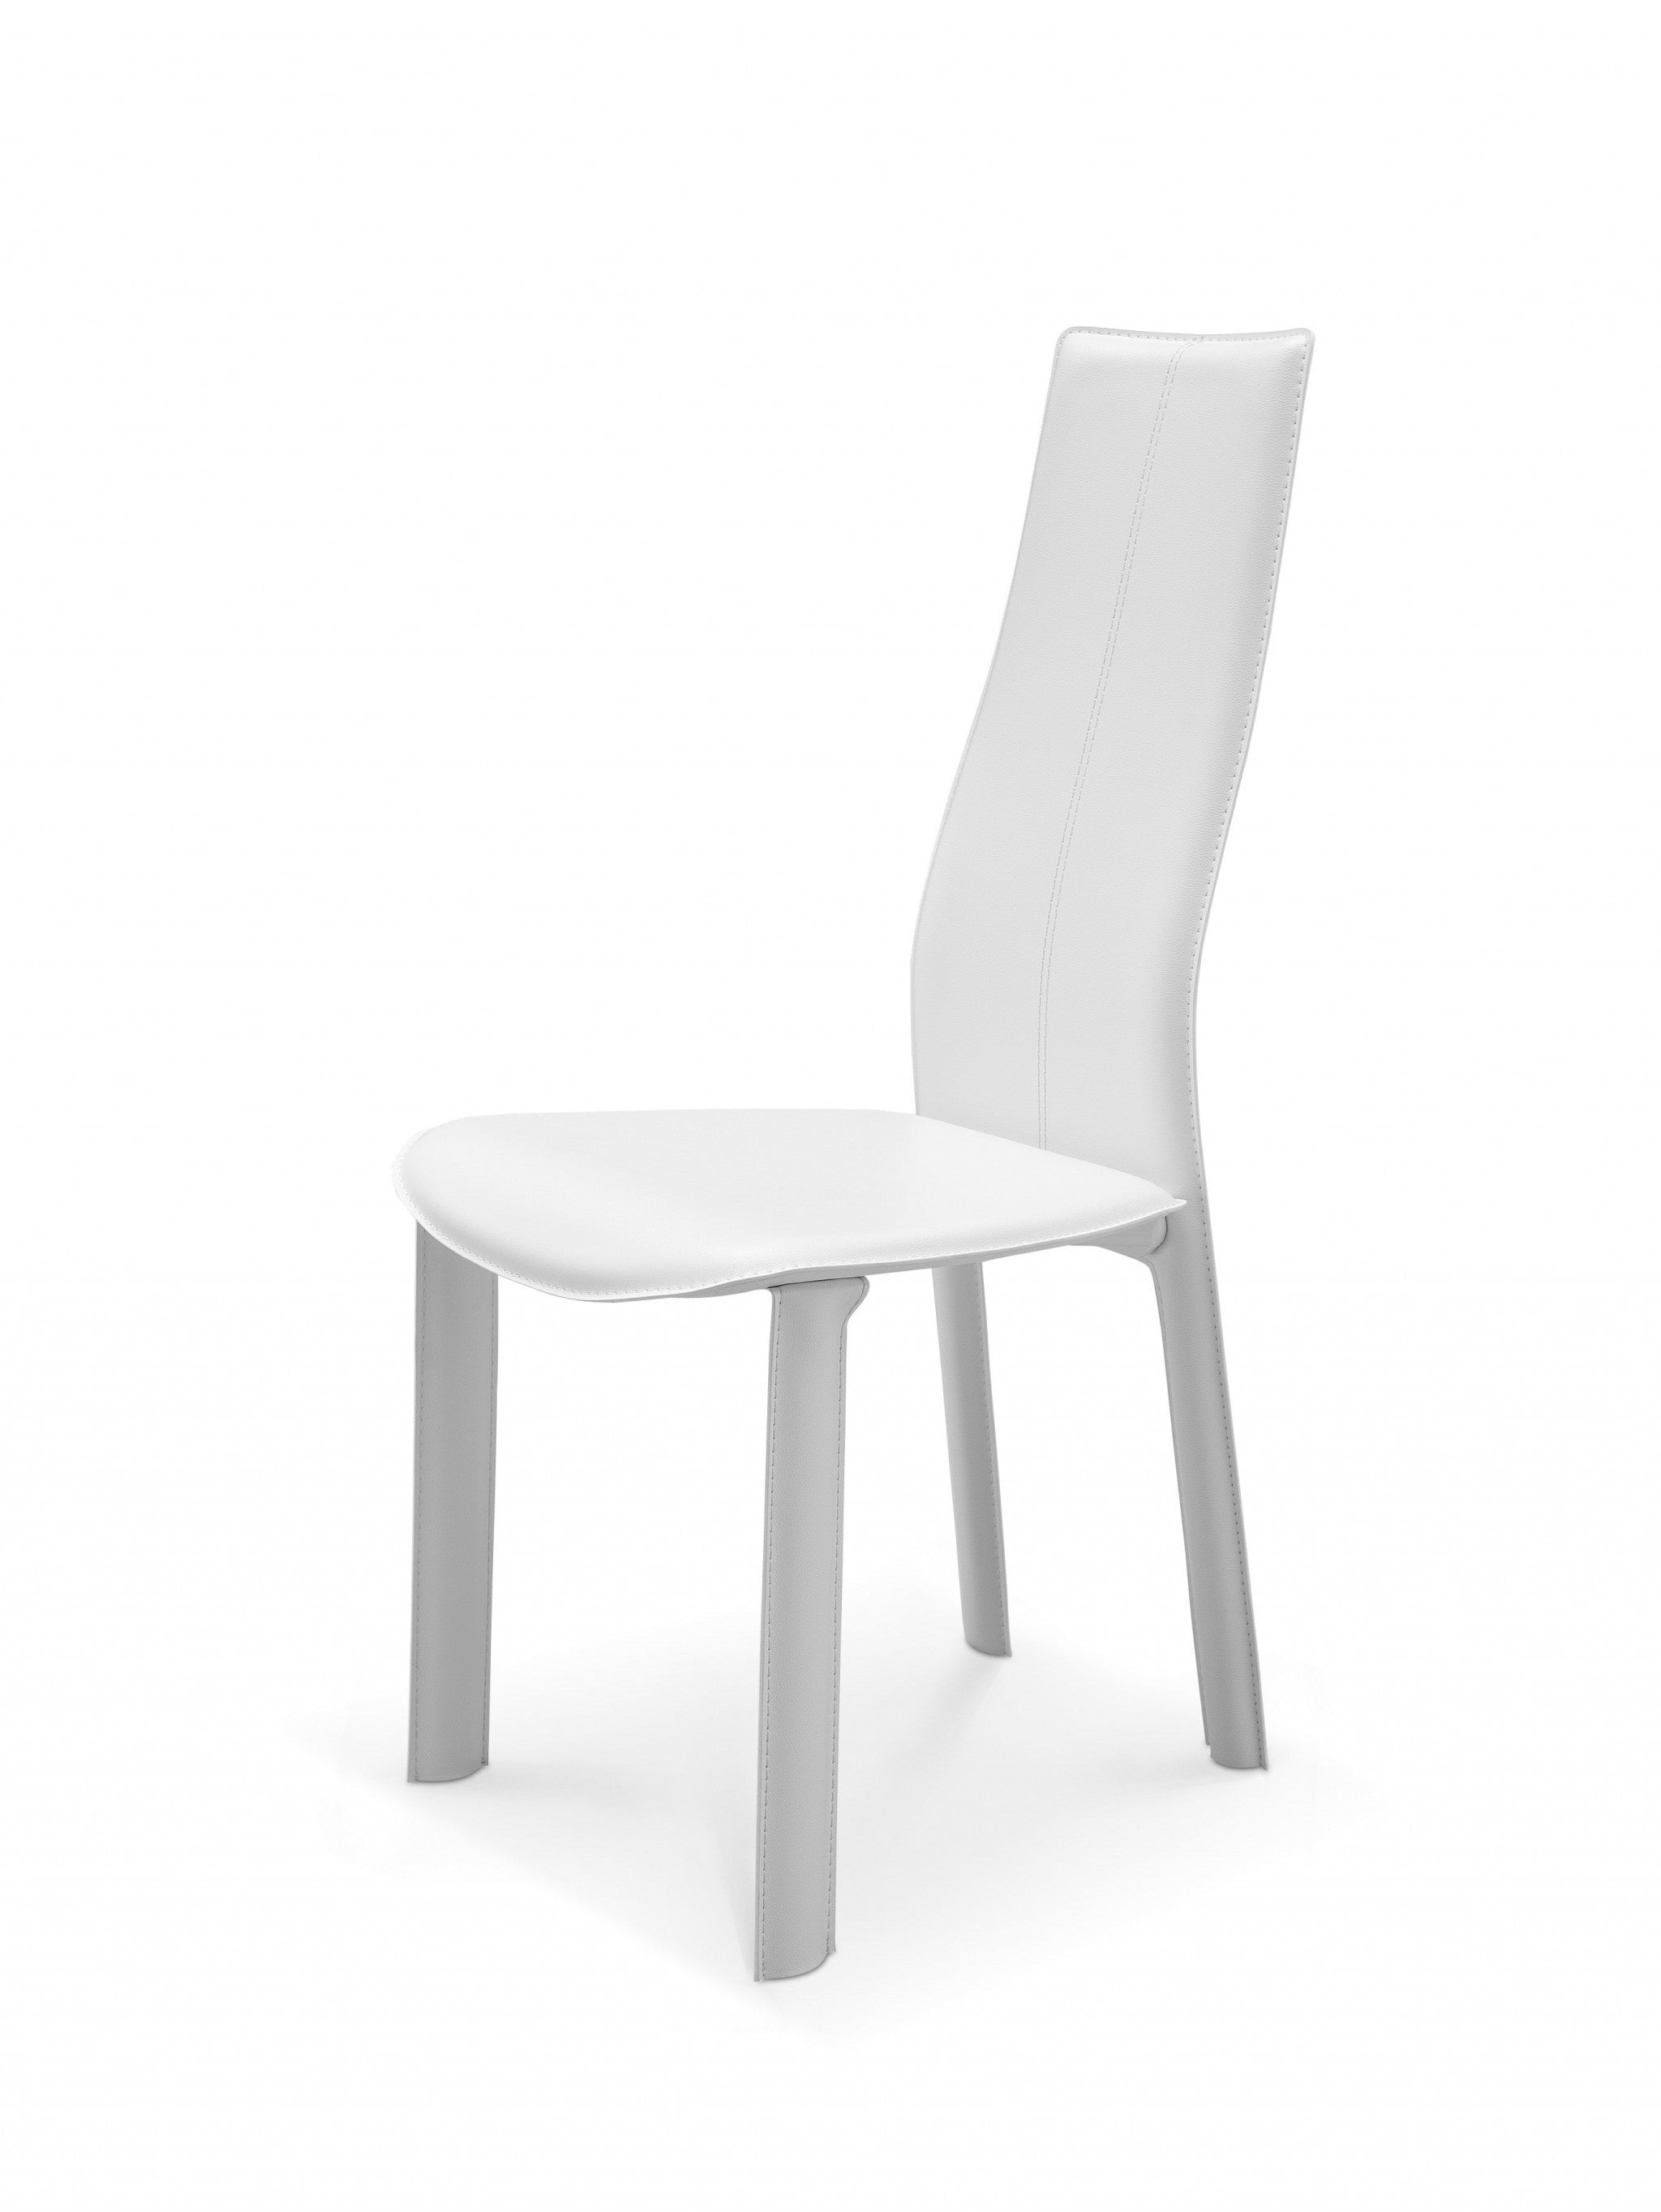 Set Of 4 Modern Dining White Faux Leather Dining Chairs